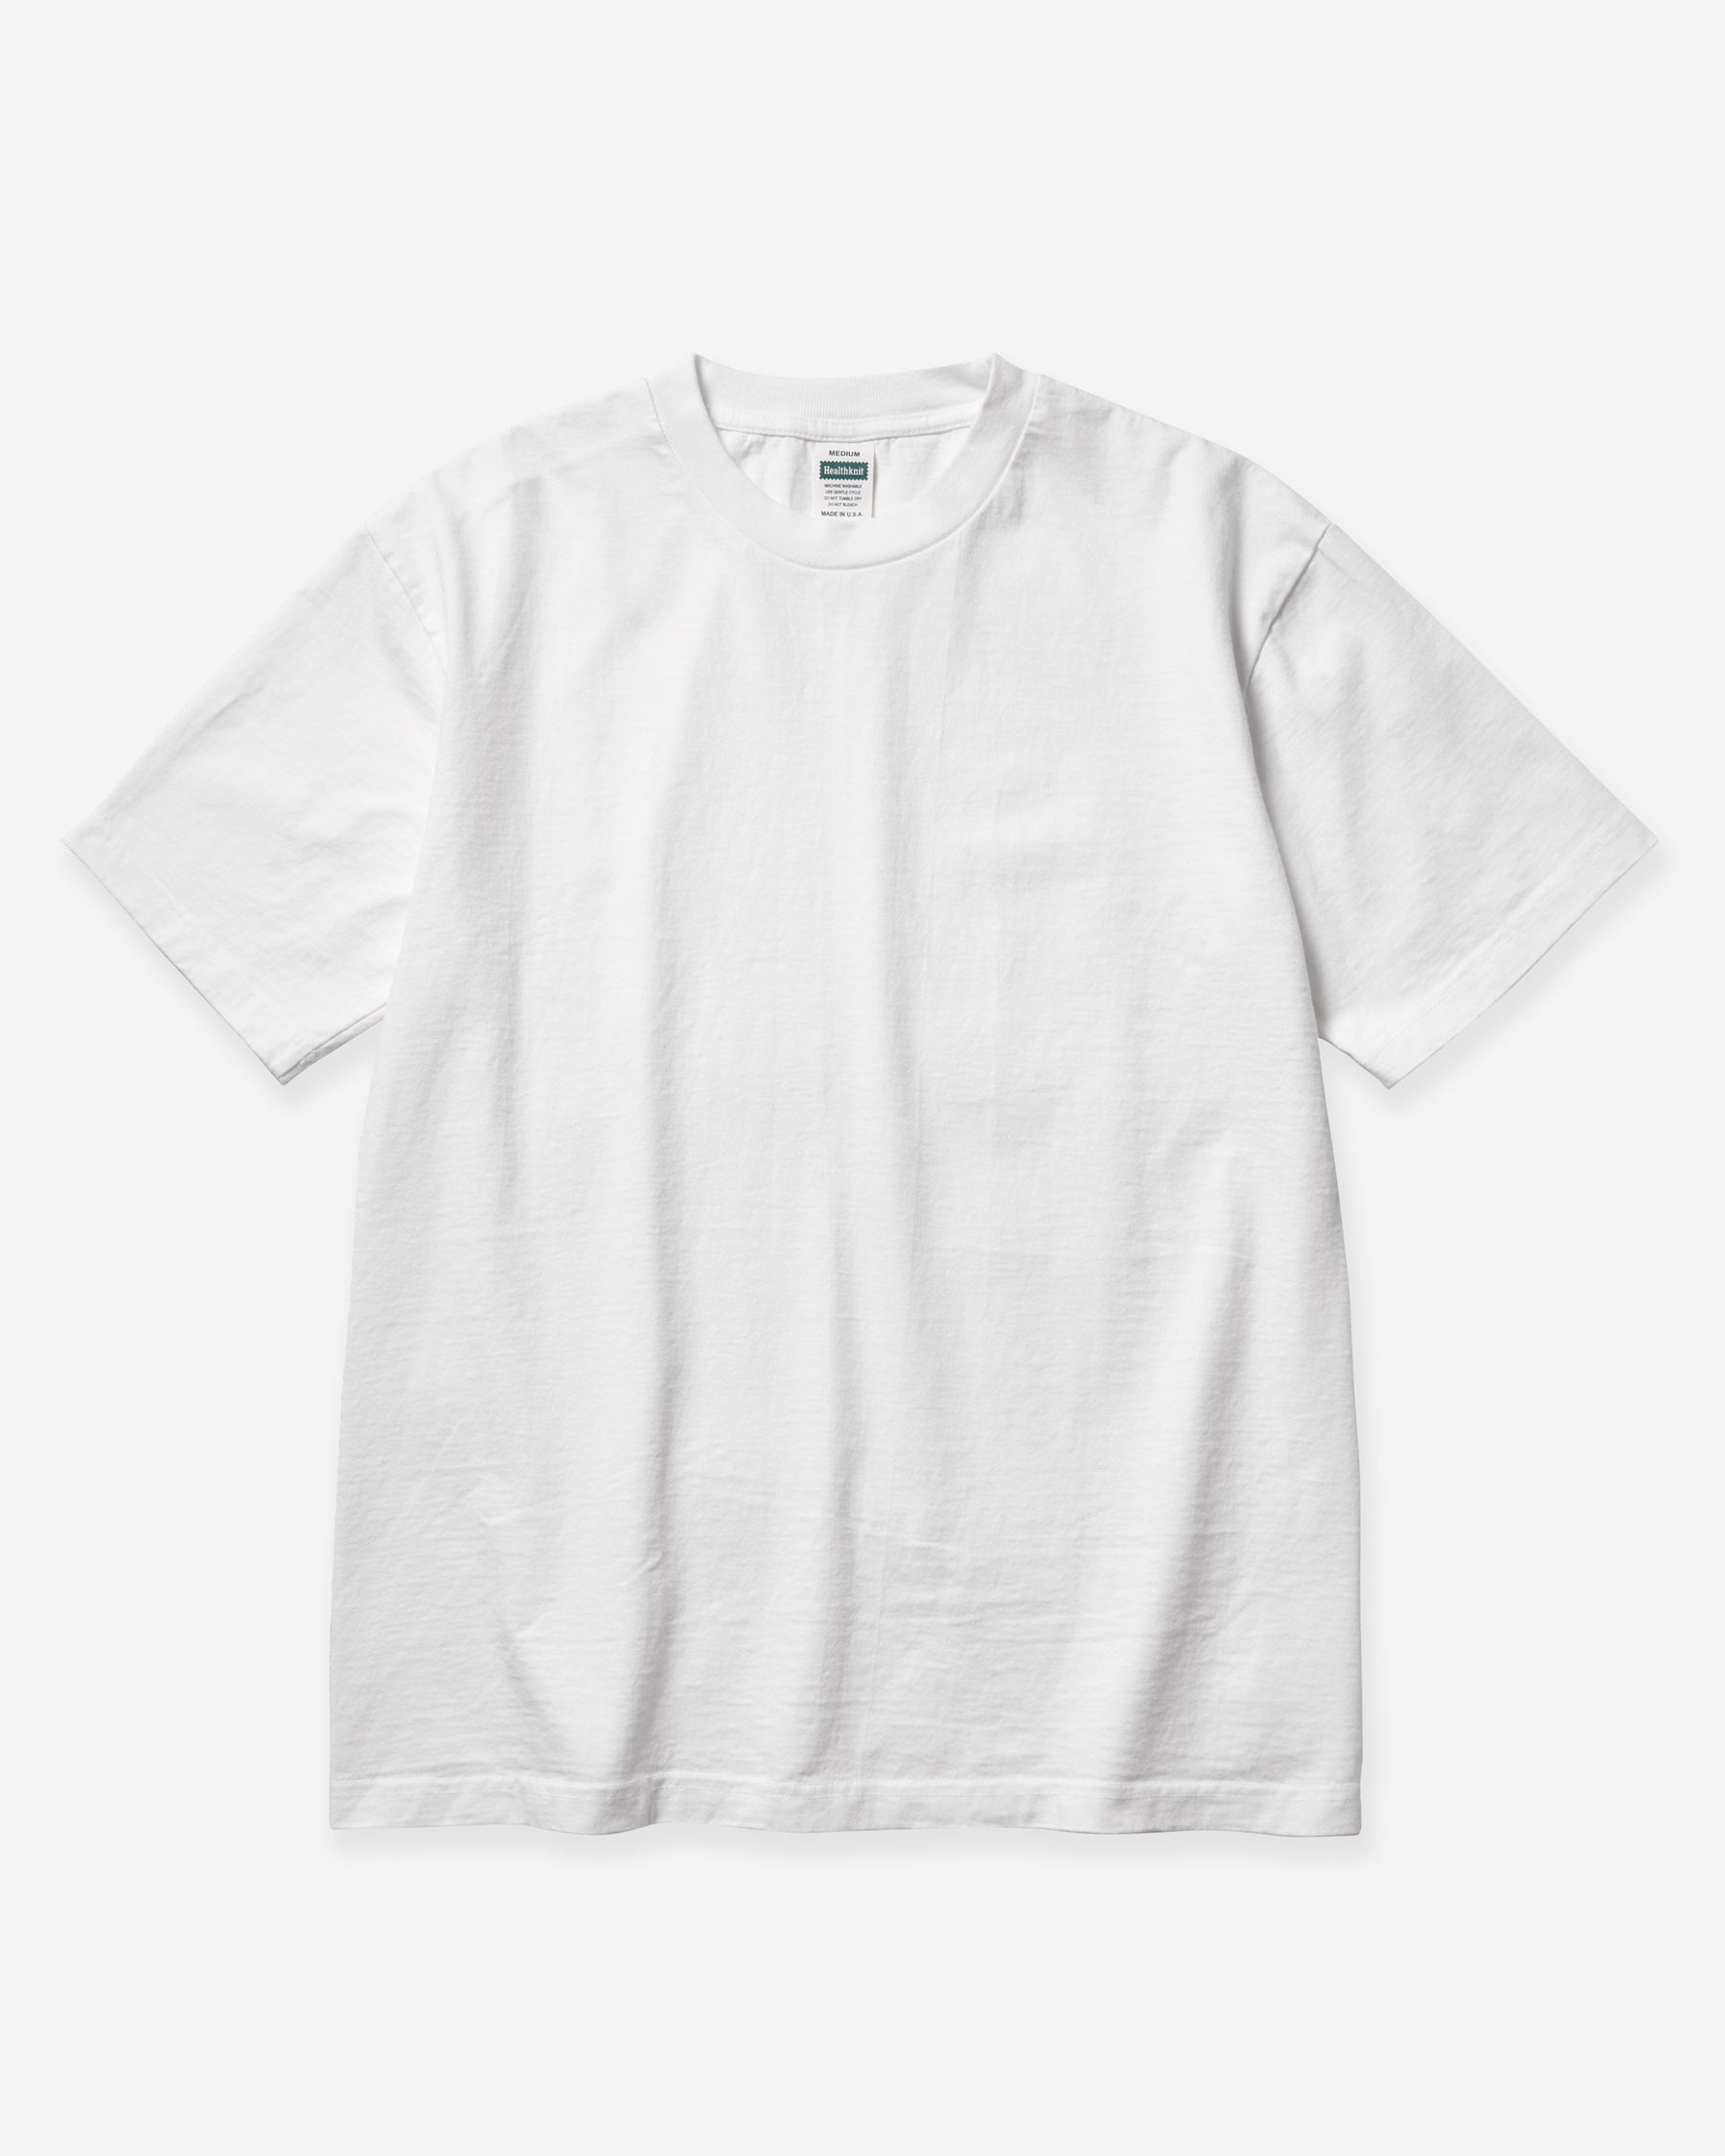 Made in USA Crew Neck S/S T-Shirt - White